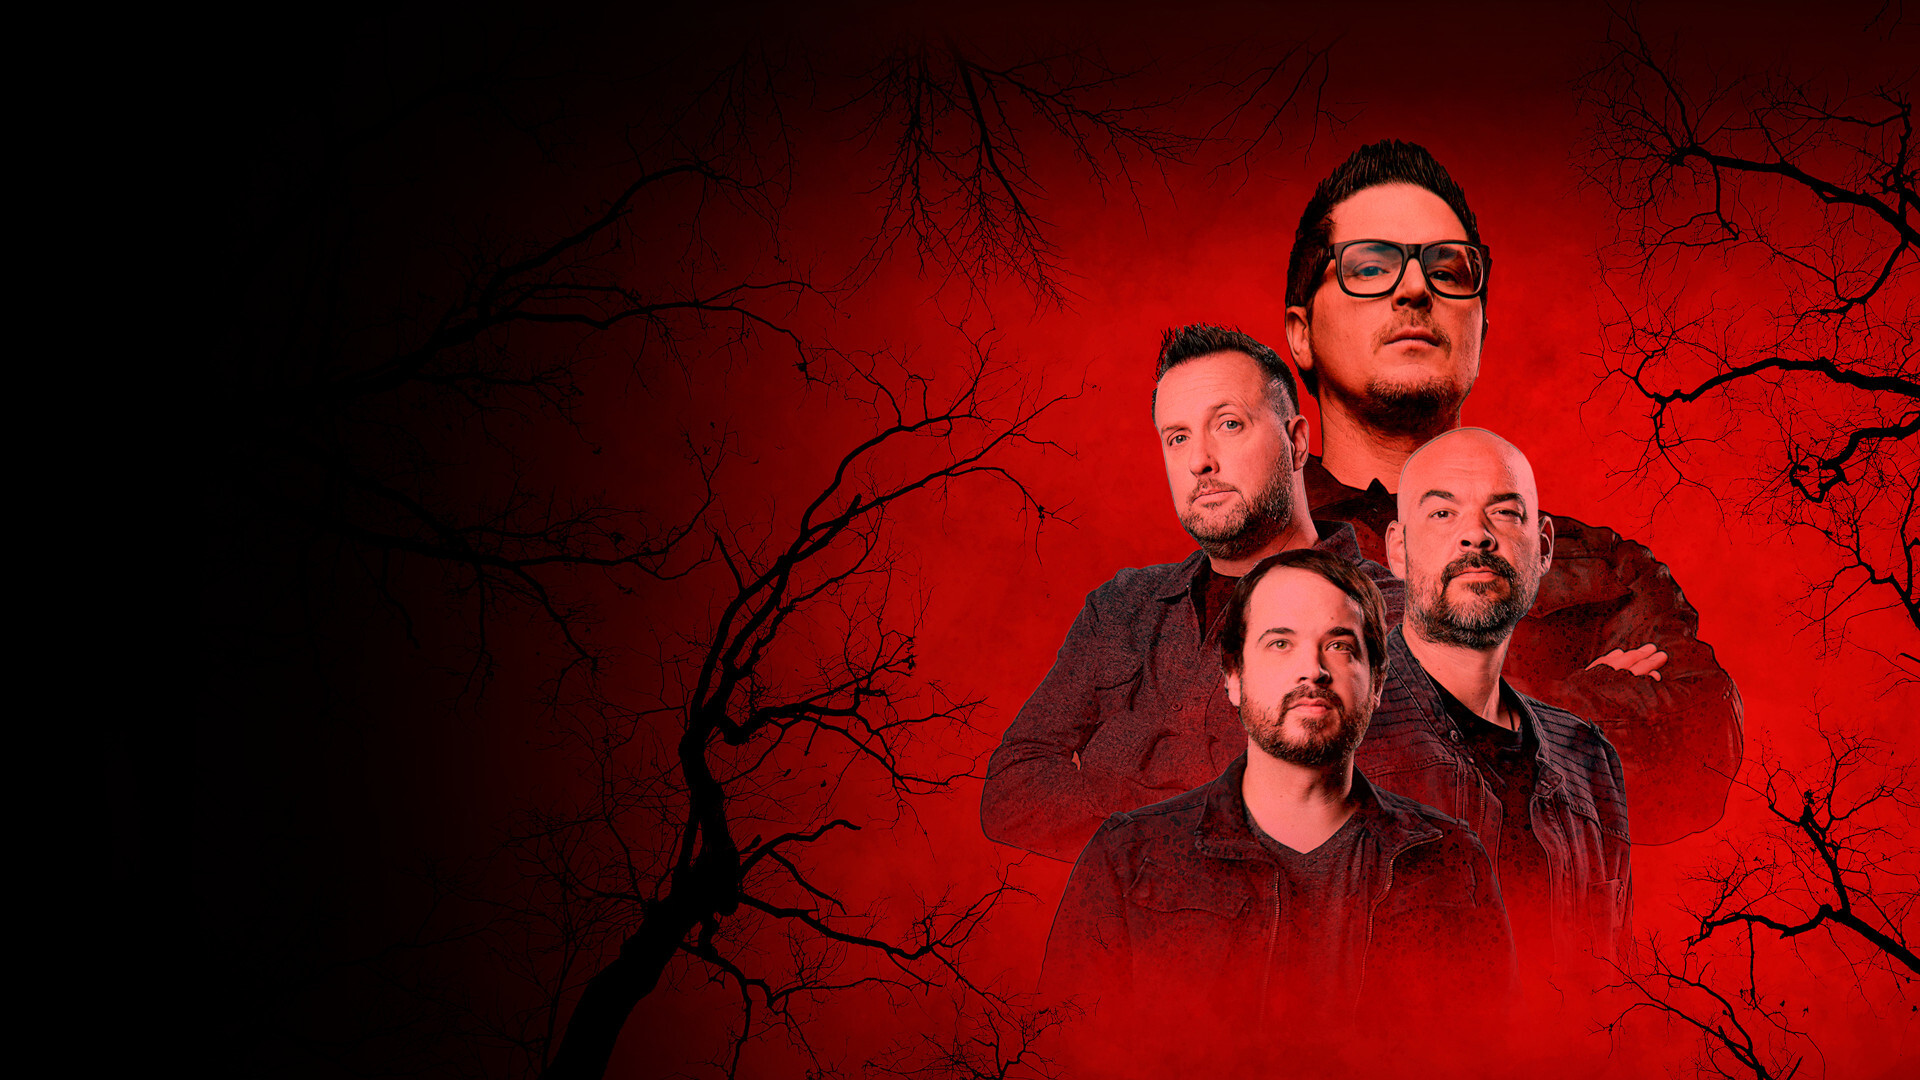 Ghost Adventures (TV Series): The popular American show about collecting visual or auditory evidence of paranormal activity. 1920x1080 Full HD Wallpaper.